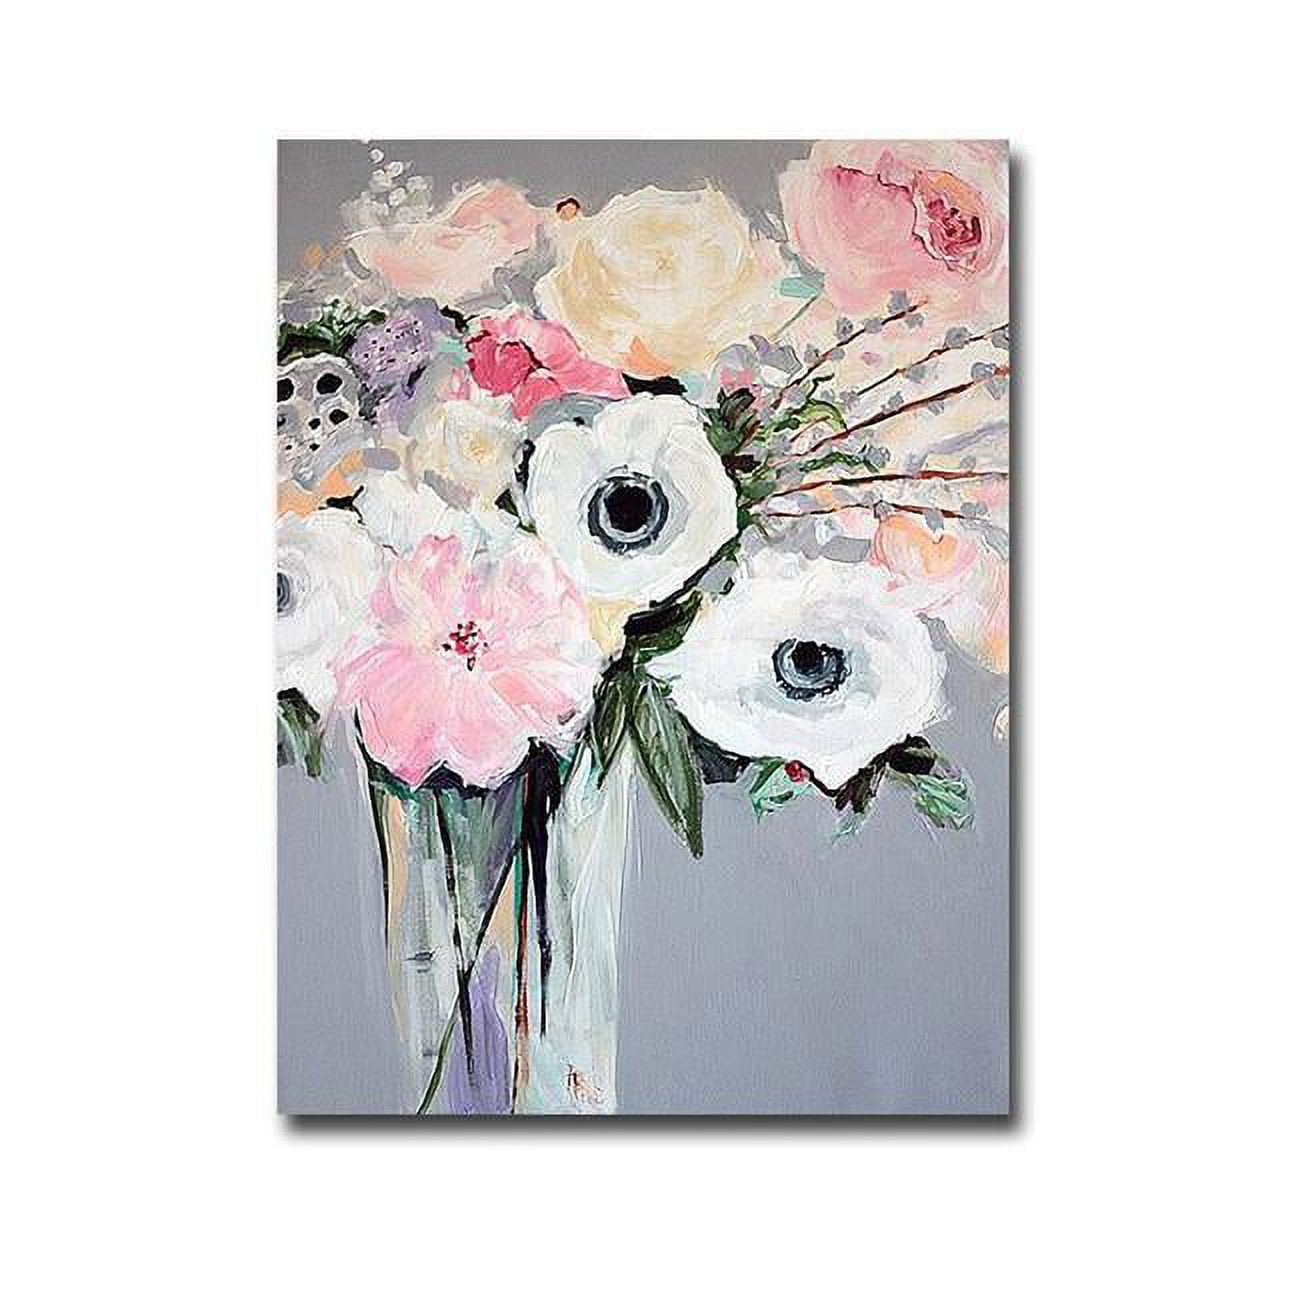 1216846ig Sweetie Pie By Jacqueline Brewer Premium Gallery Wrapped Canvas Giclee Art - 12 X 16 X 1.5 In.